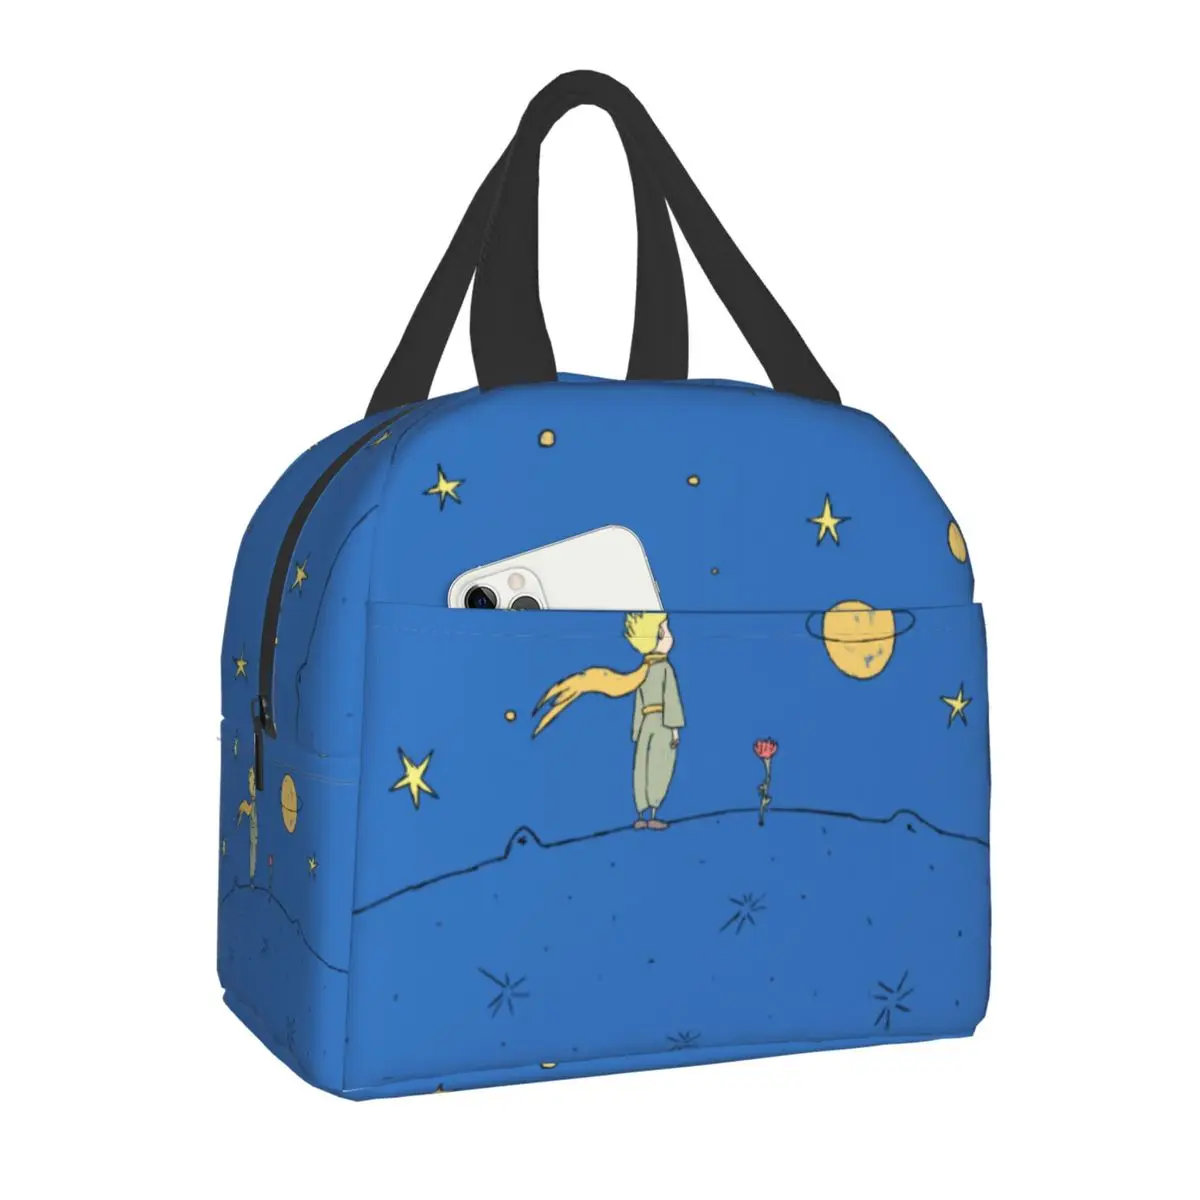 Classic Fiction The Little Prince Insulated Lunch Bag for School Office Food Waterproof Cooler Thermal Lunch Box Women Children